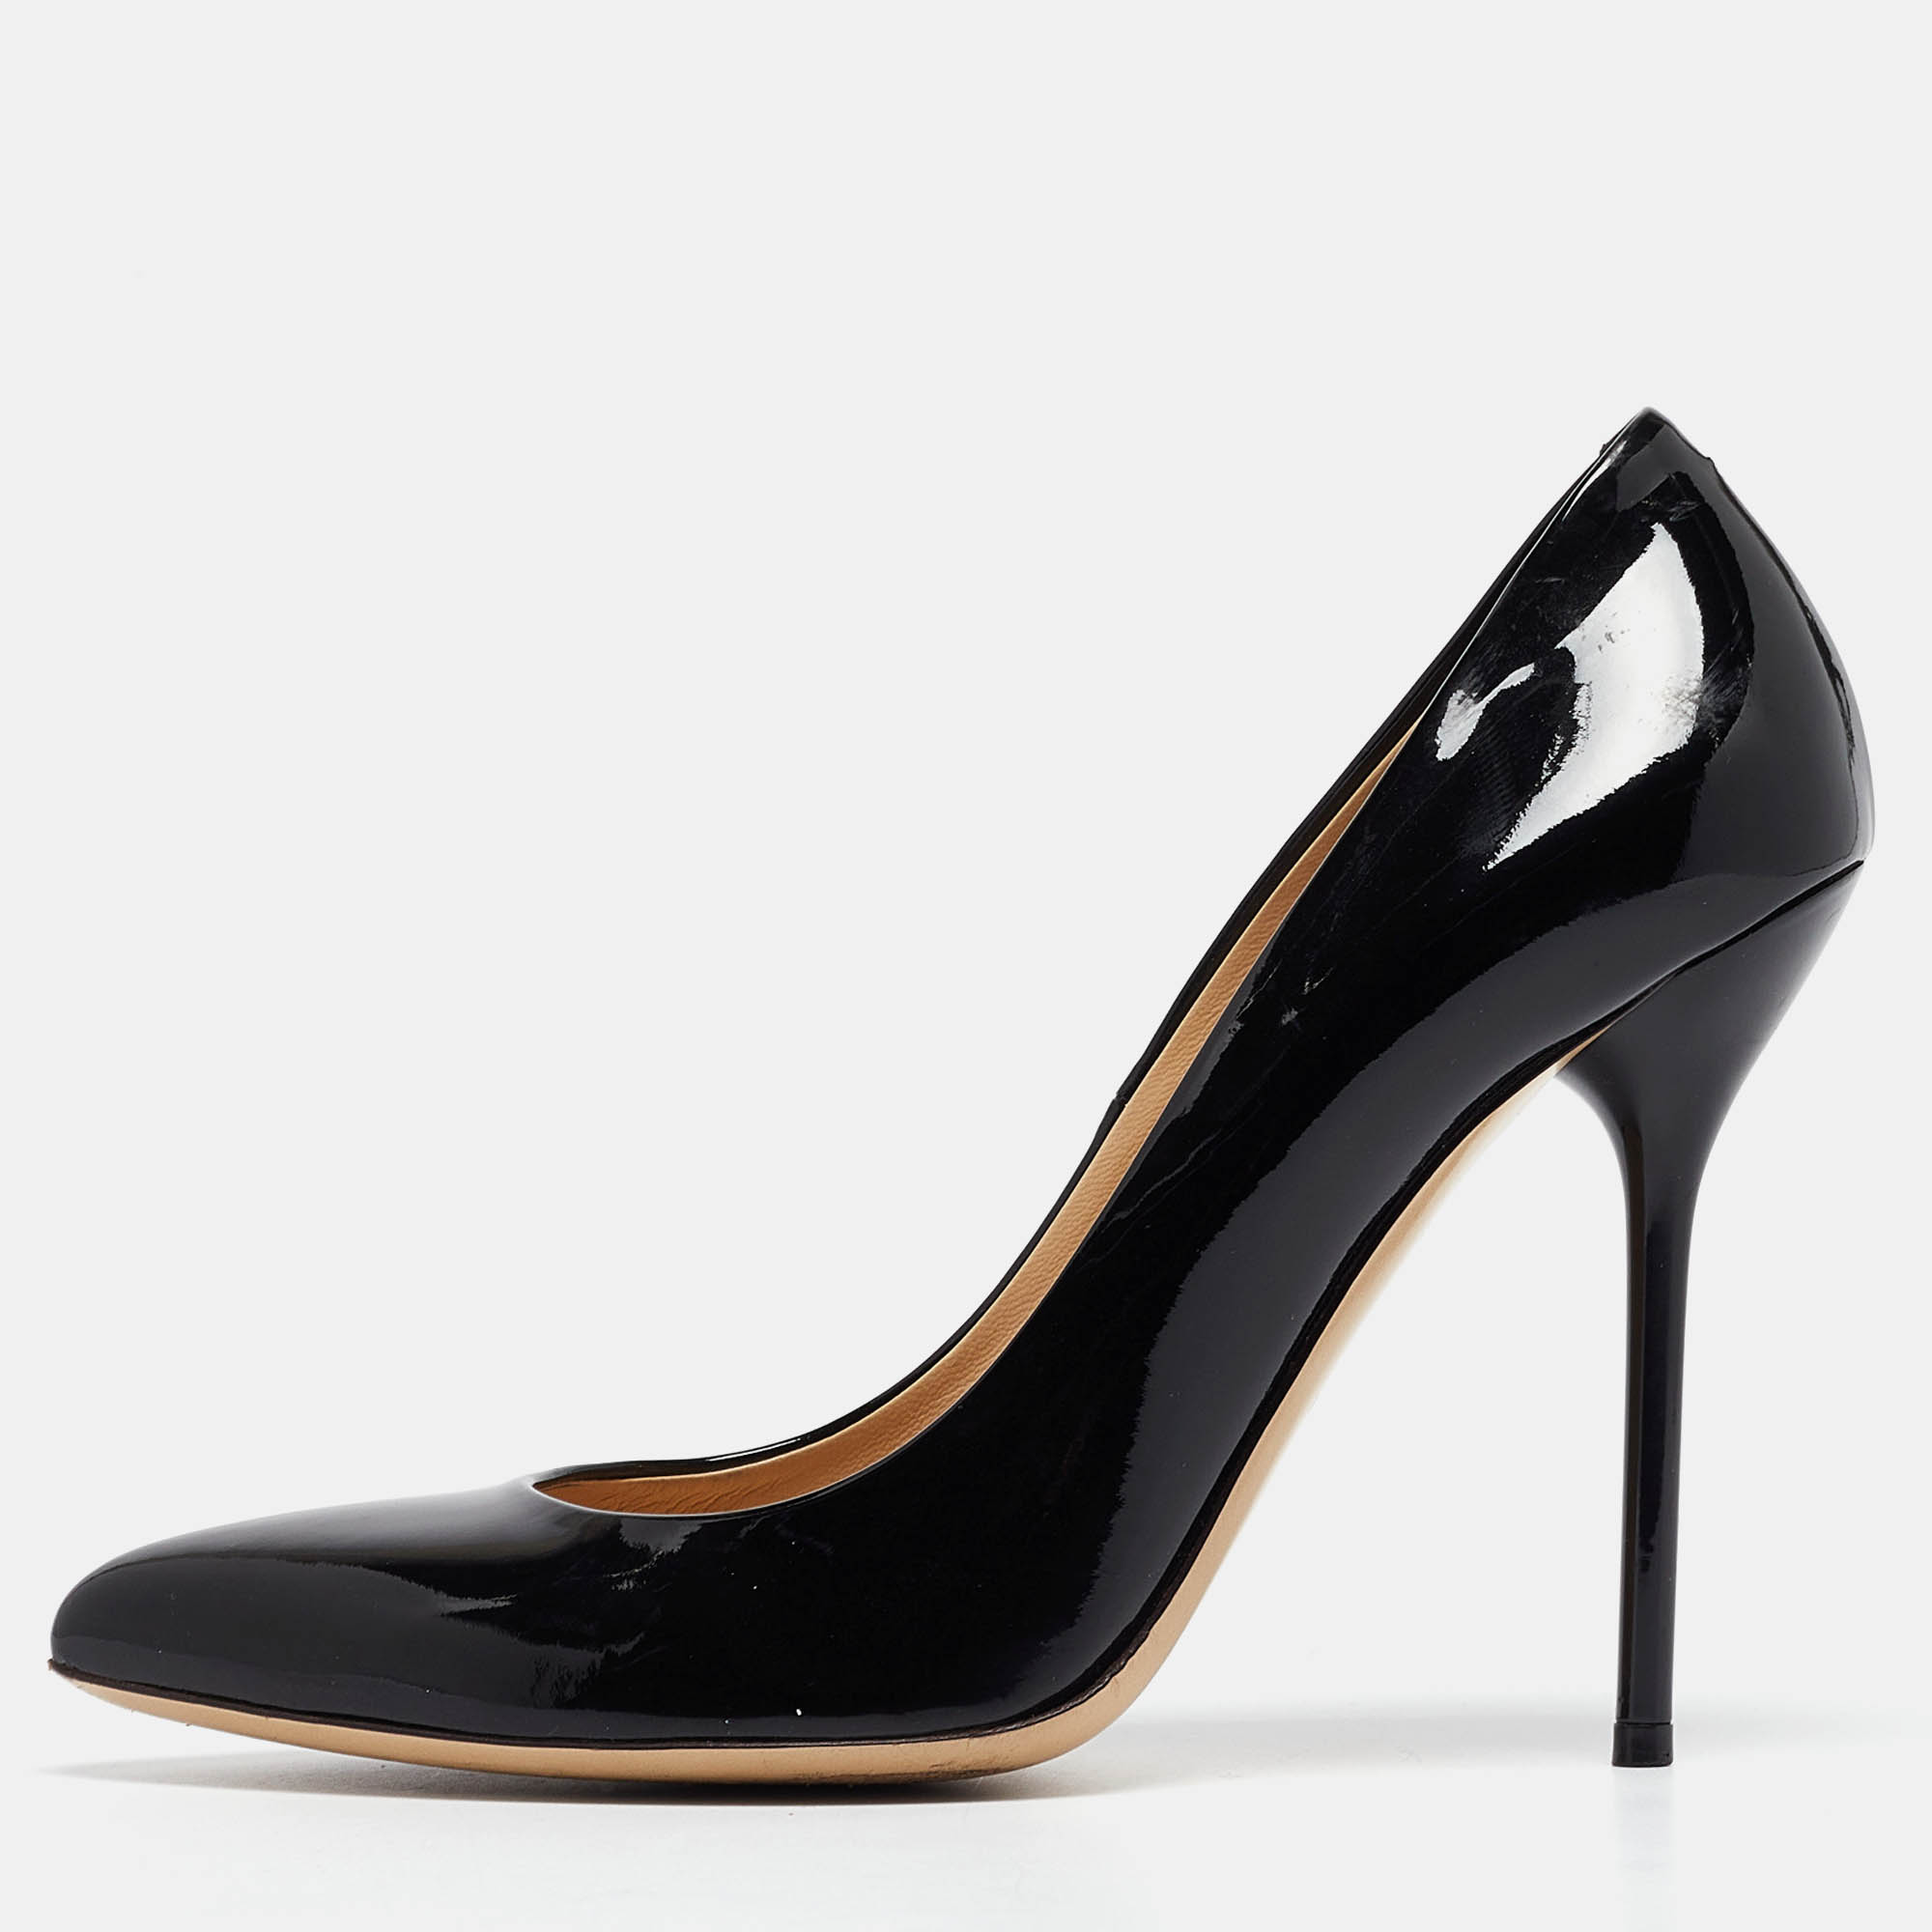 Gucci black patent leather pointed toe pumps size 38.5